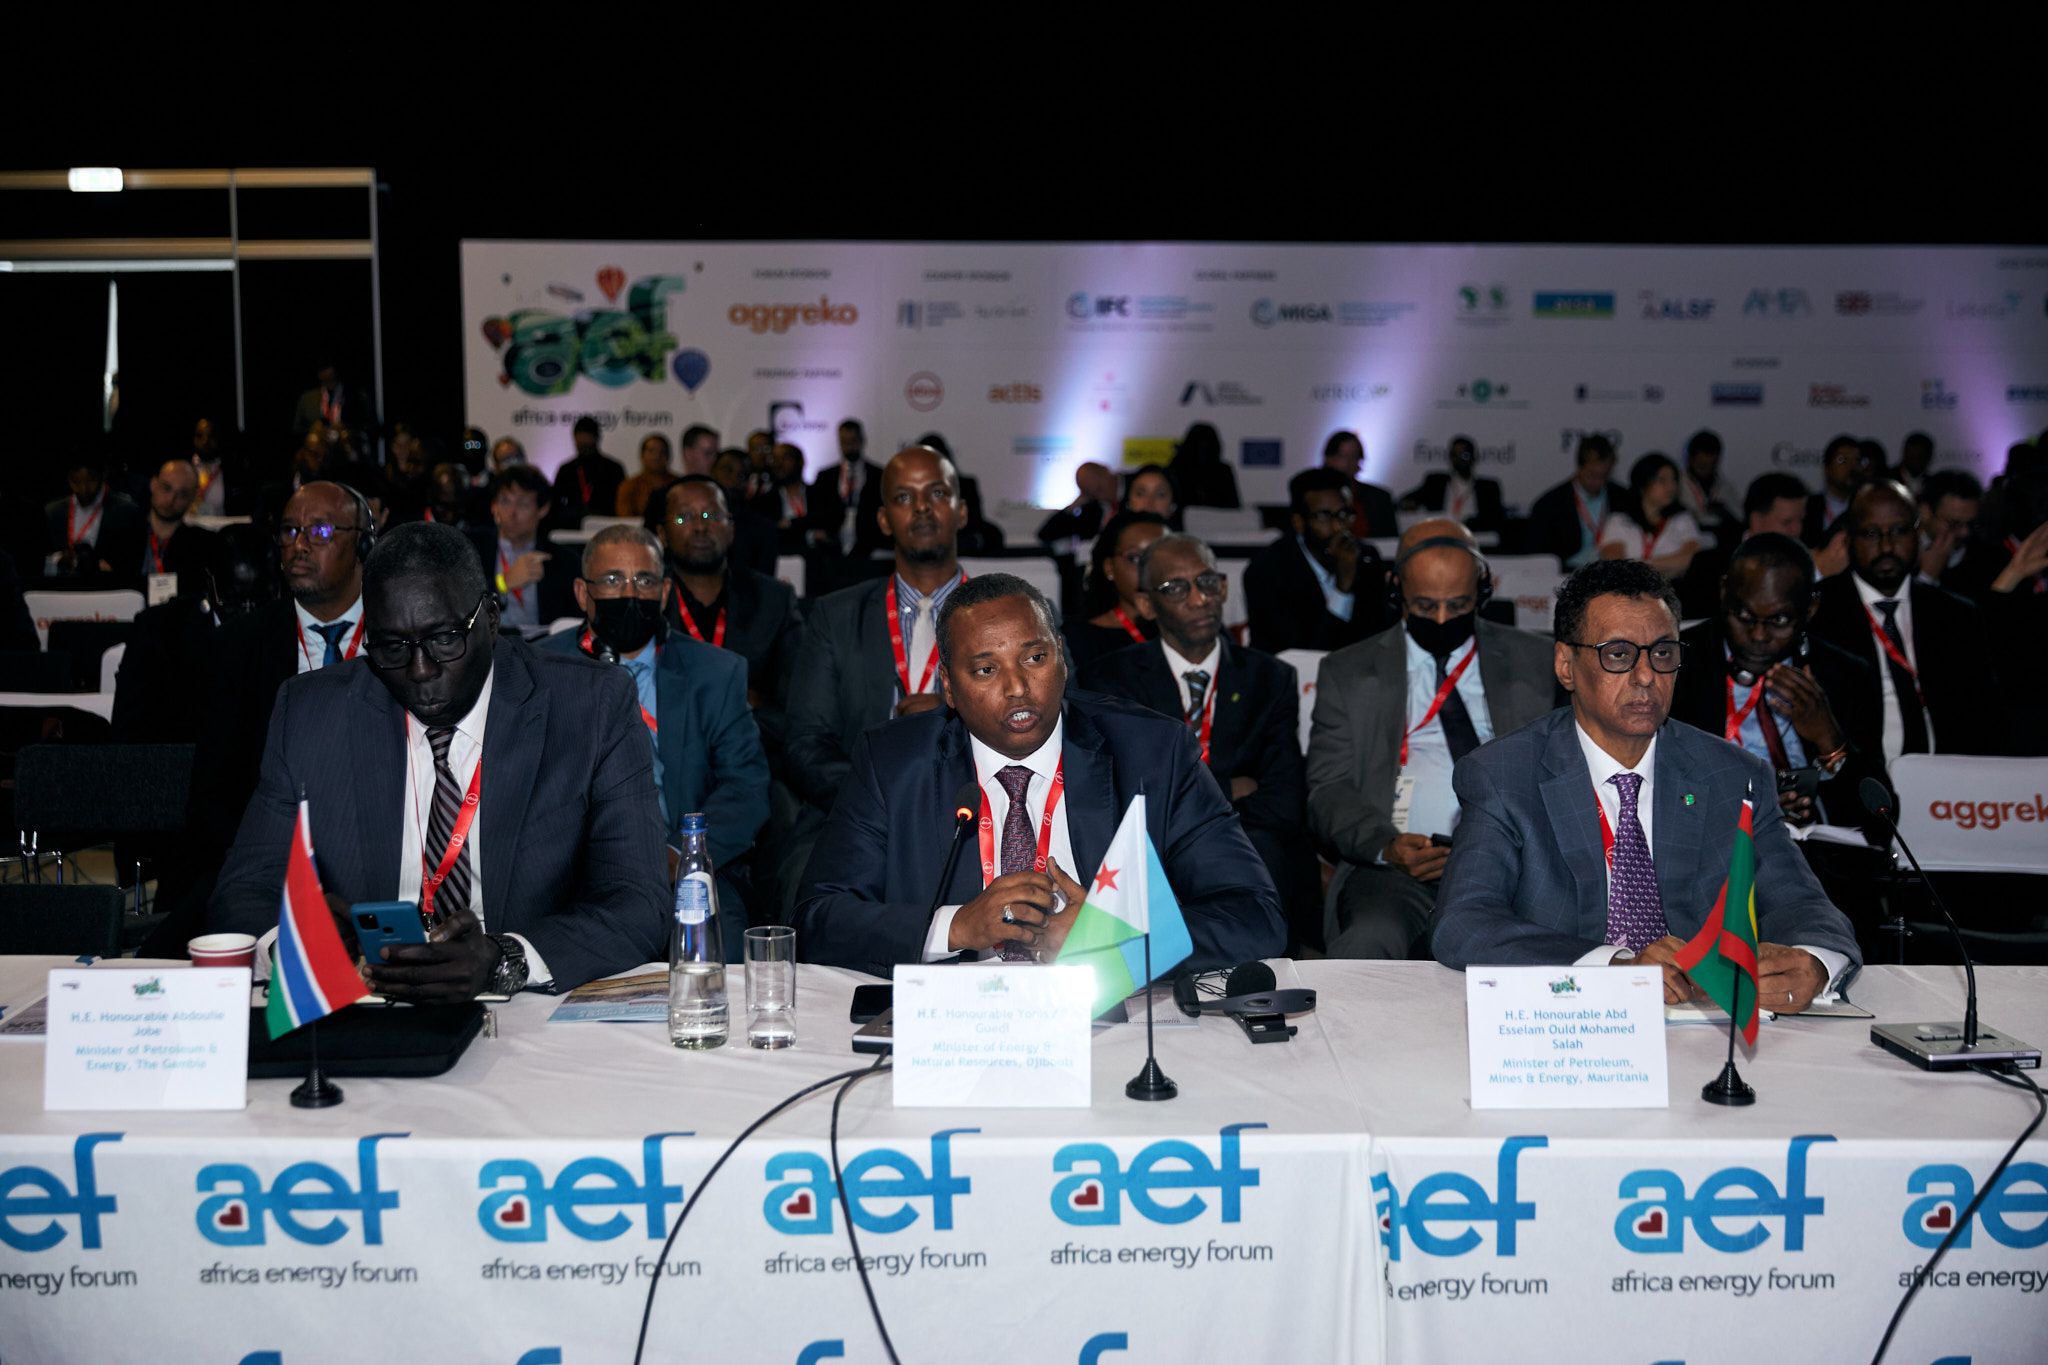 aef: Africa for Africa: Building Energy for the Just Transition